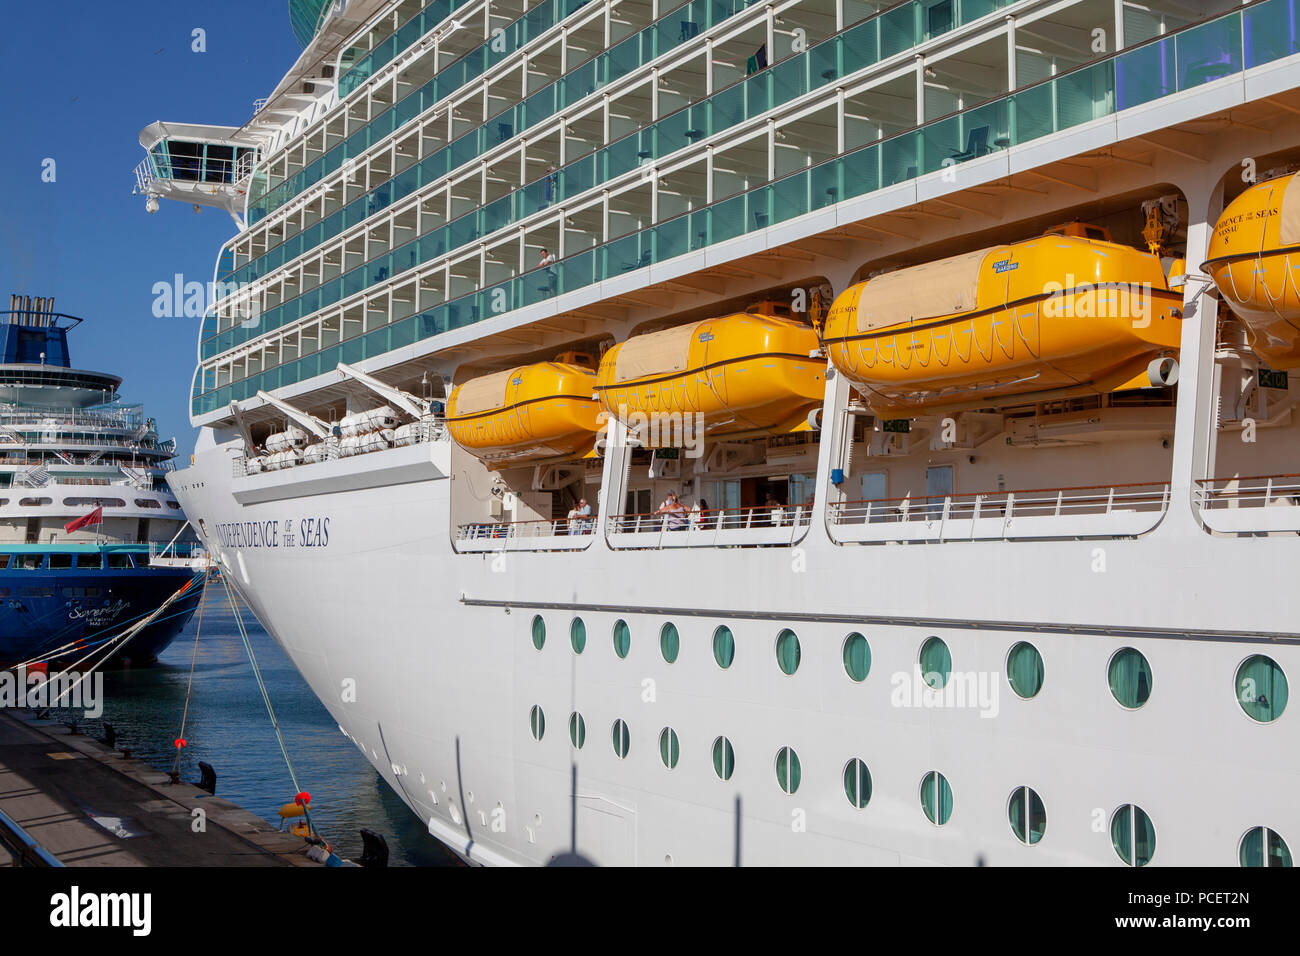 Independence of the Seas, a Freedom class cruise ship operated by the Royal Caribbean cruise line company in the Mediterranean Stock Photo